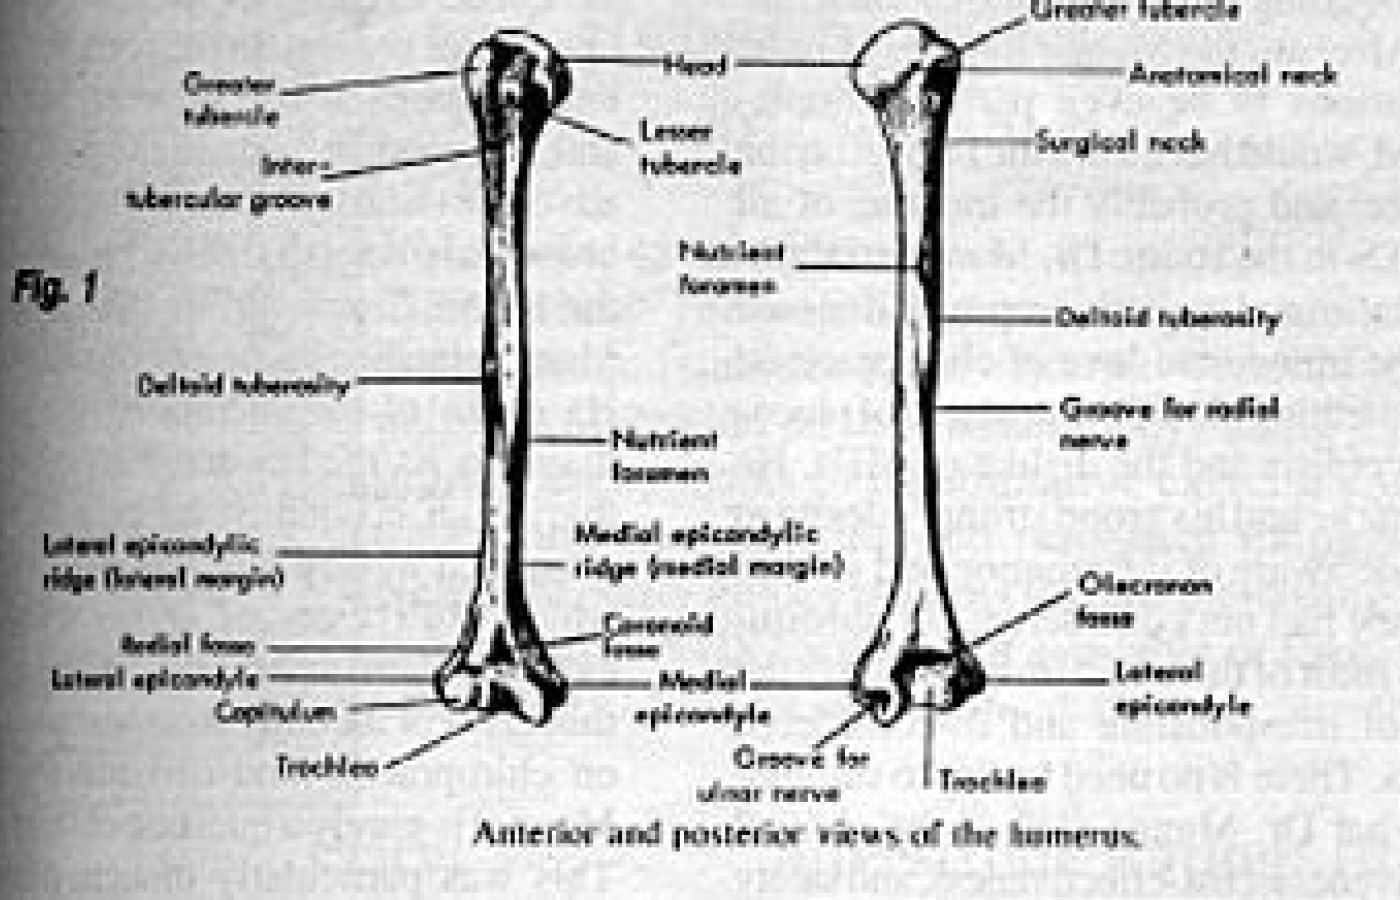 Anterior and posterior views of the humerus.